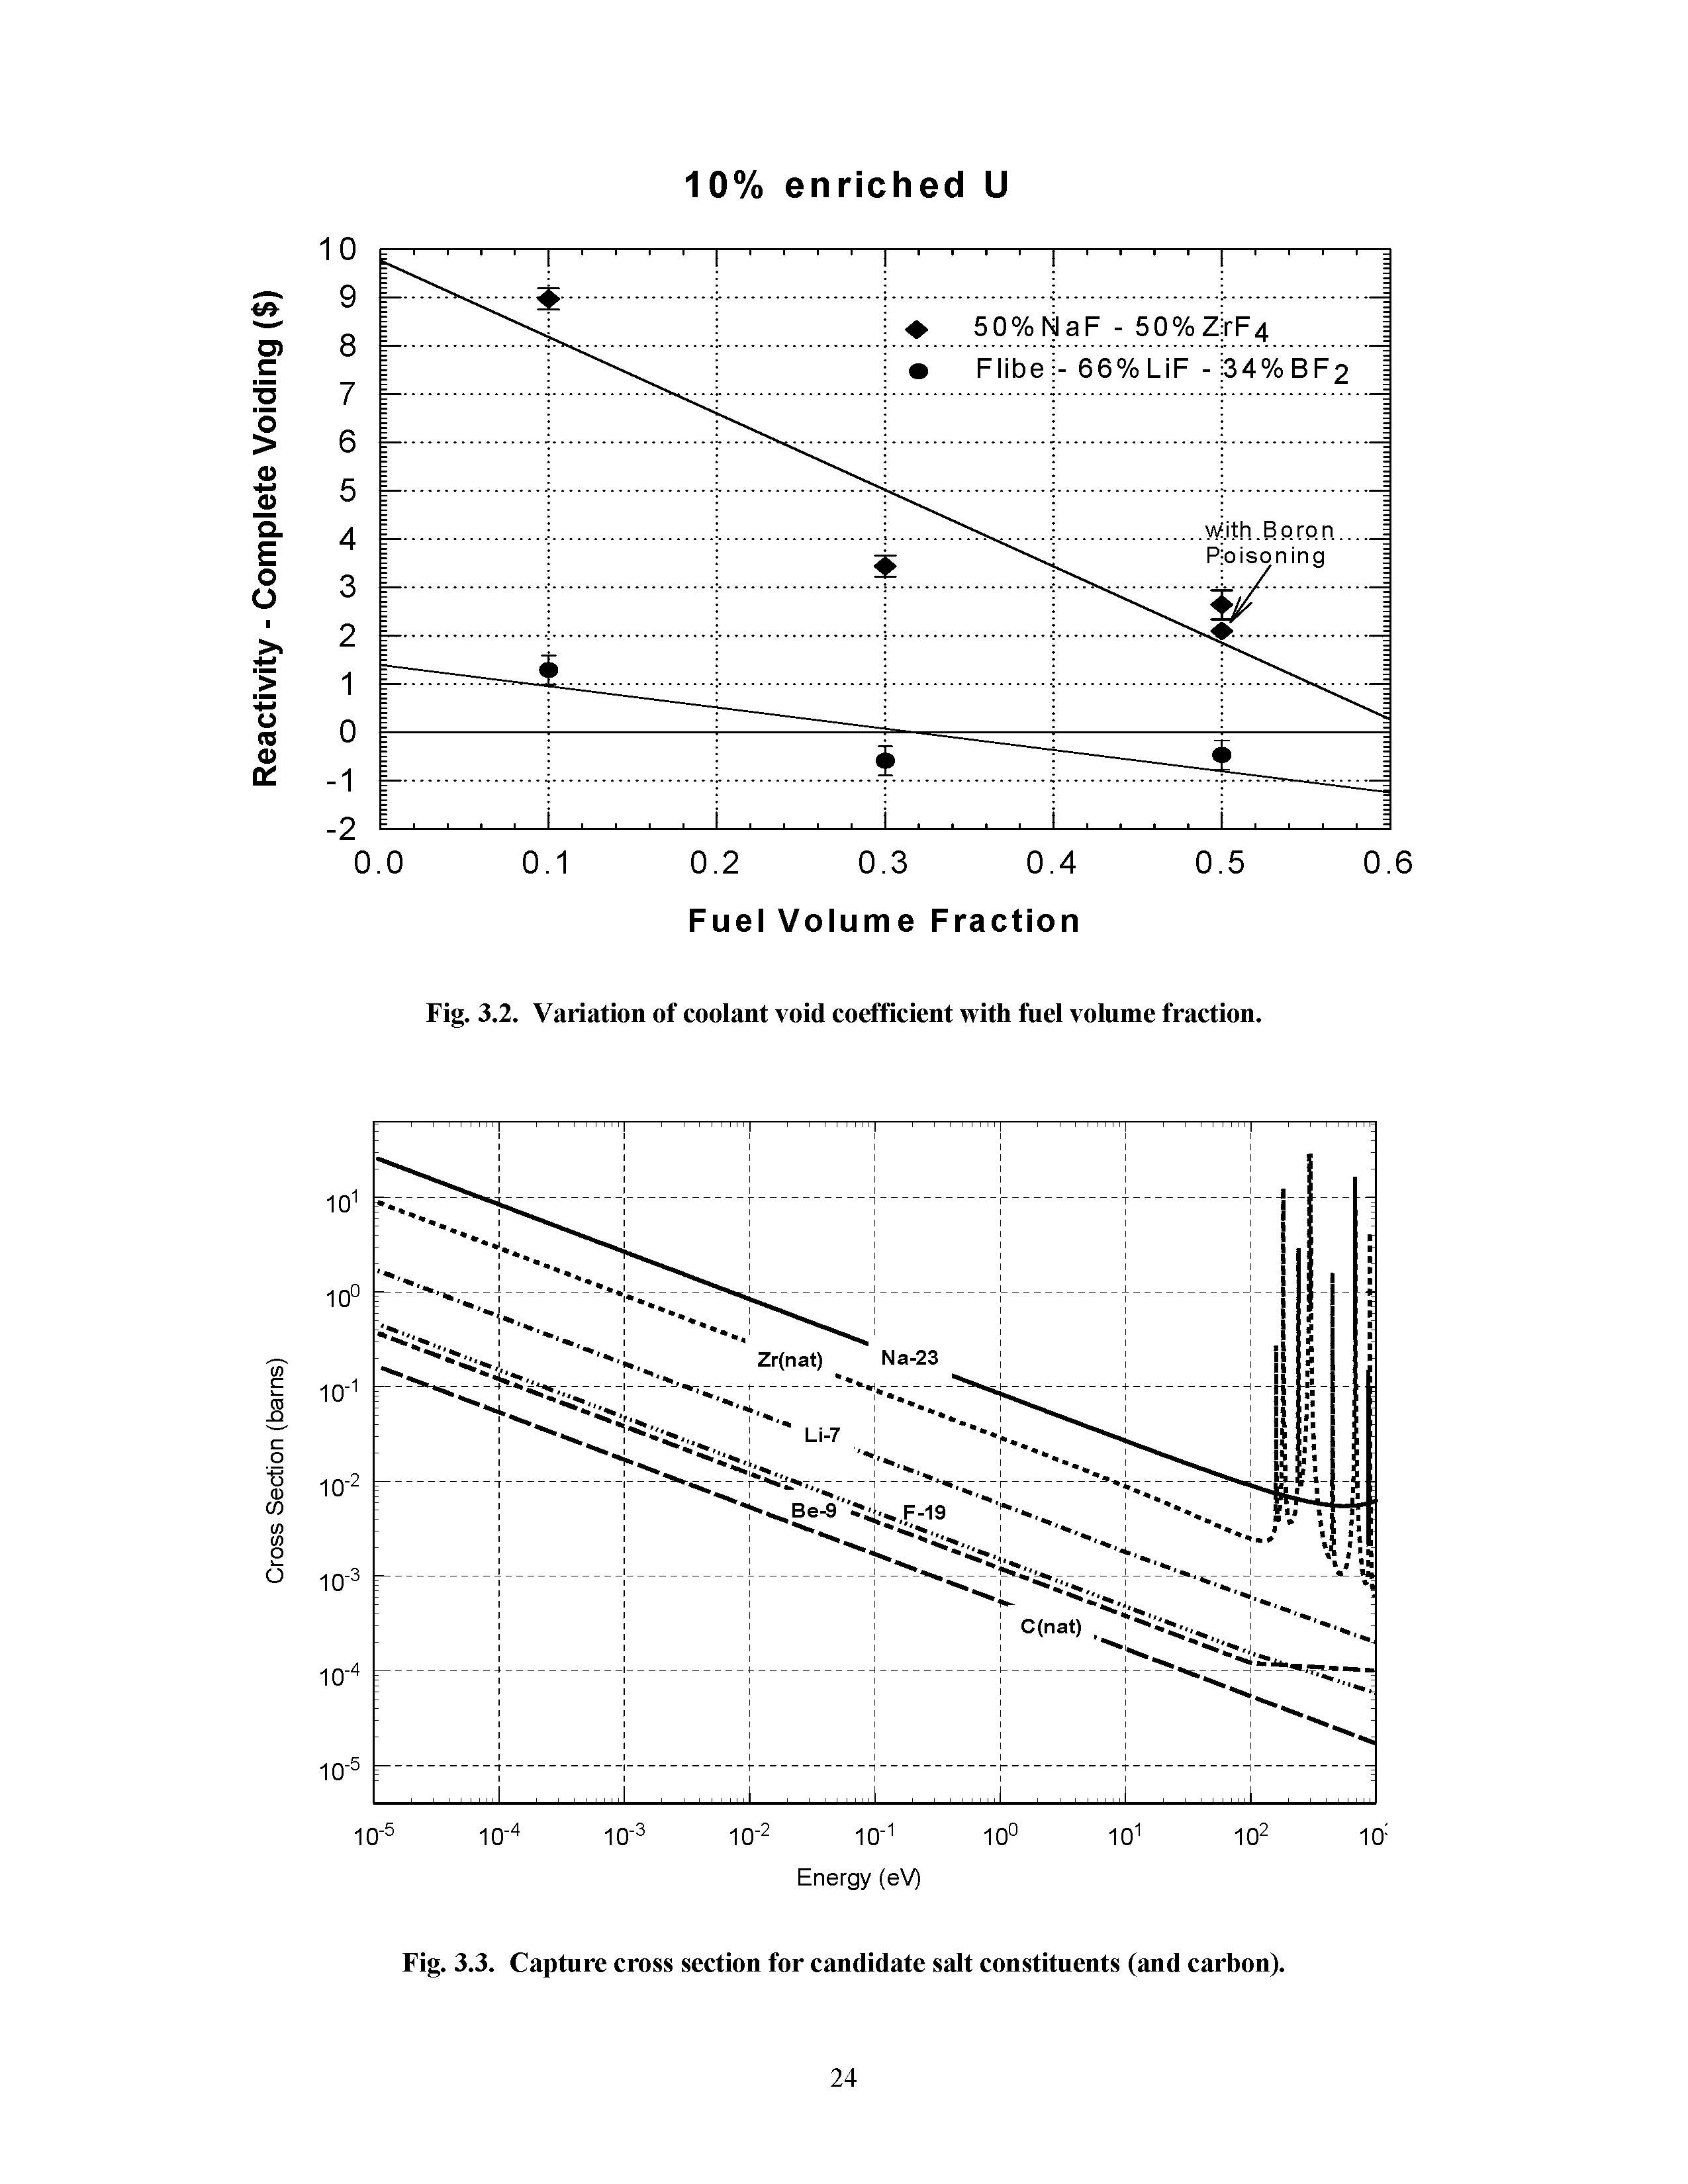 Fig. 3.2. Variation of coolant void coefficient with fnel volnme fraction.